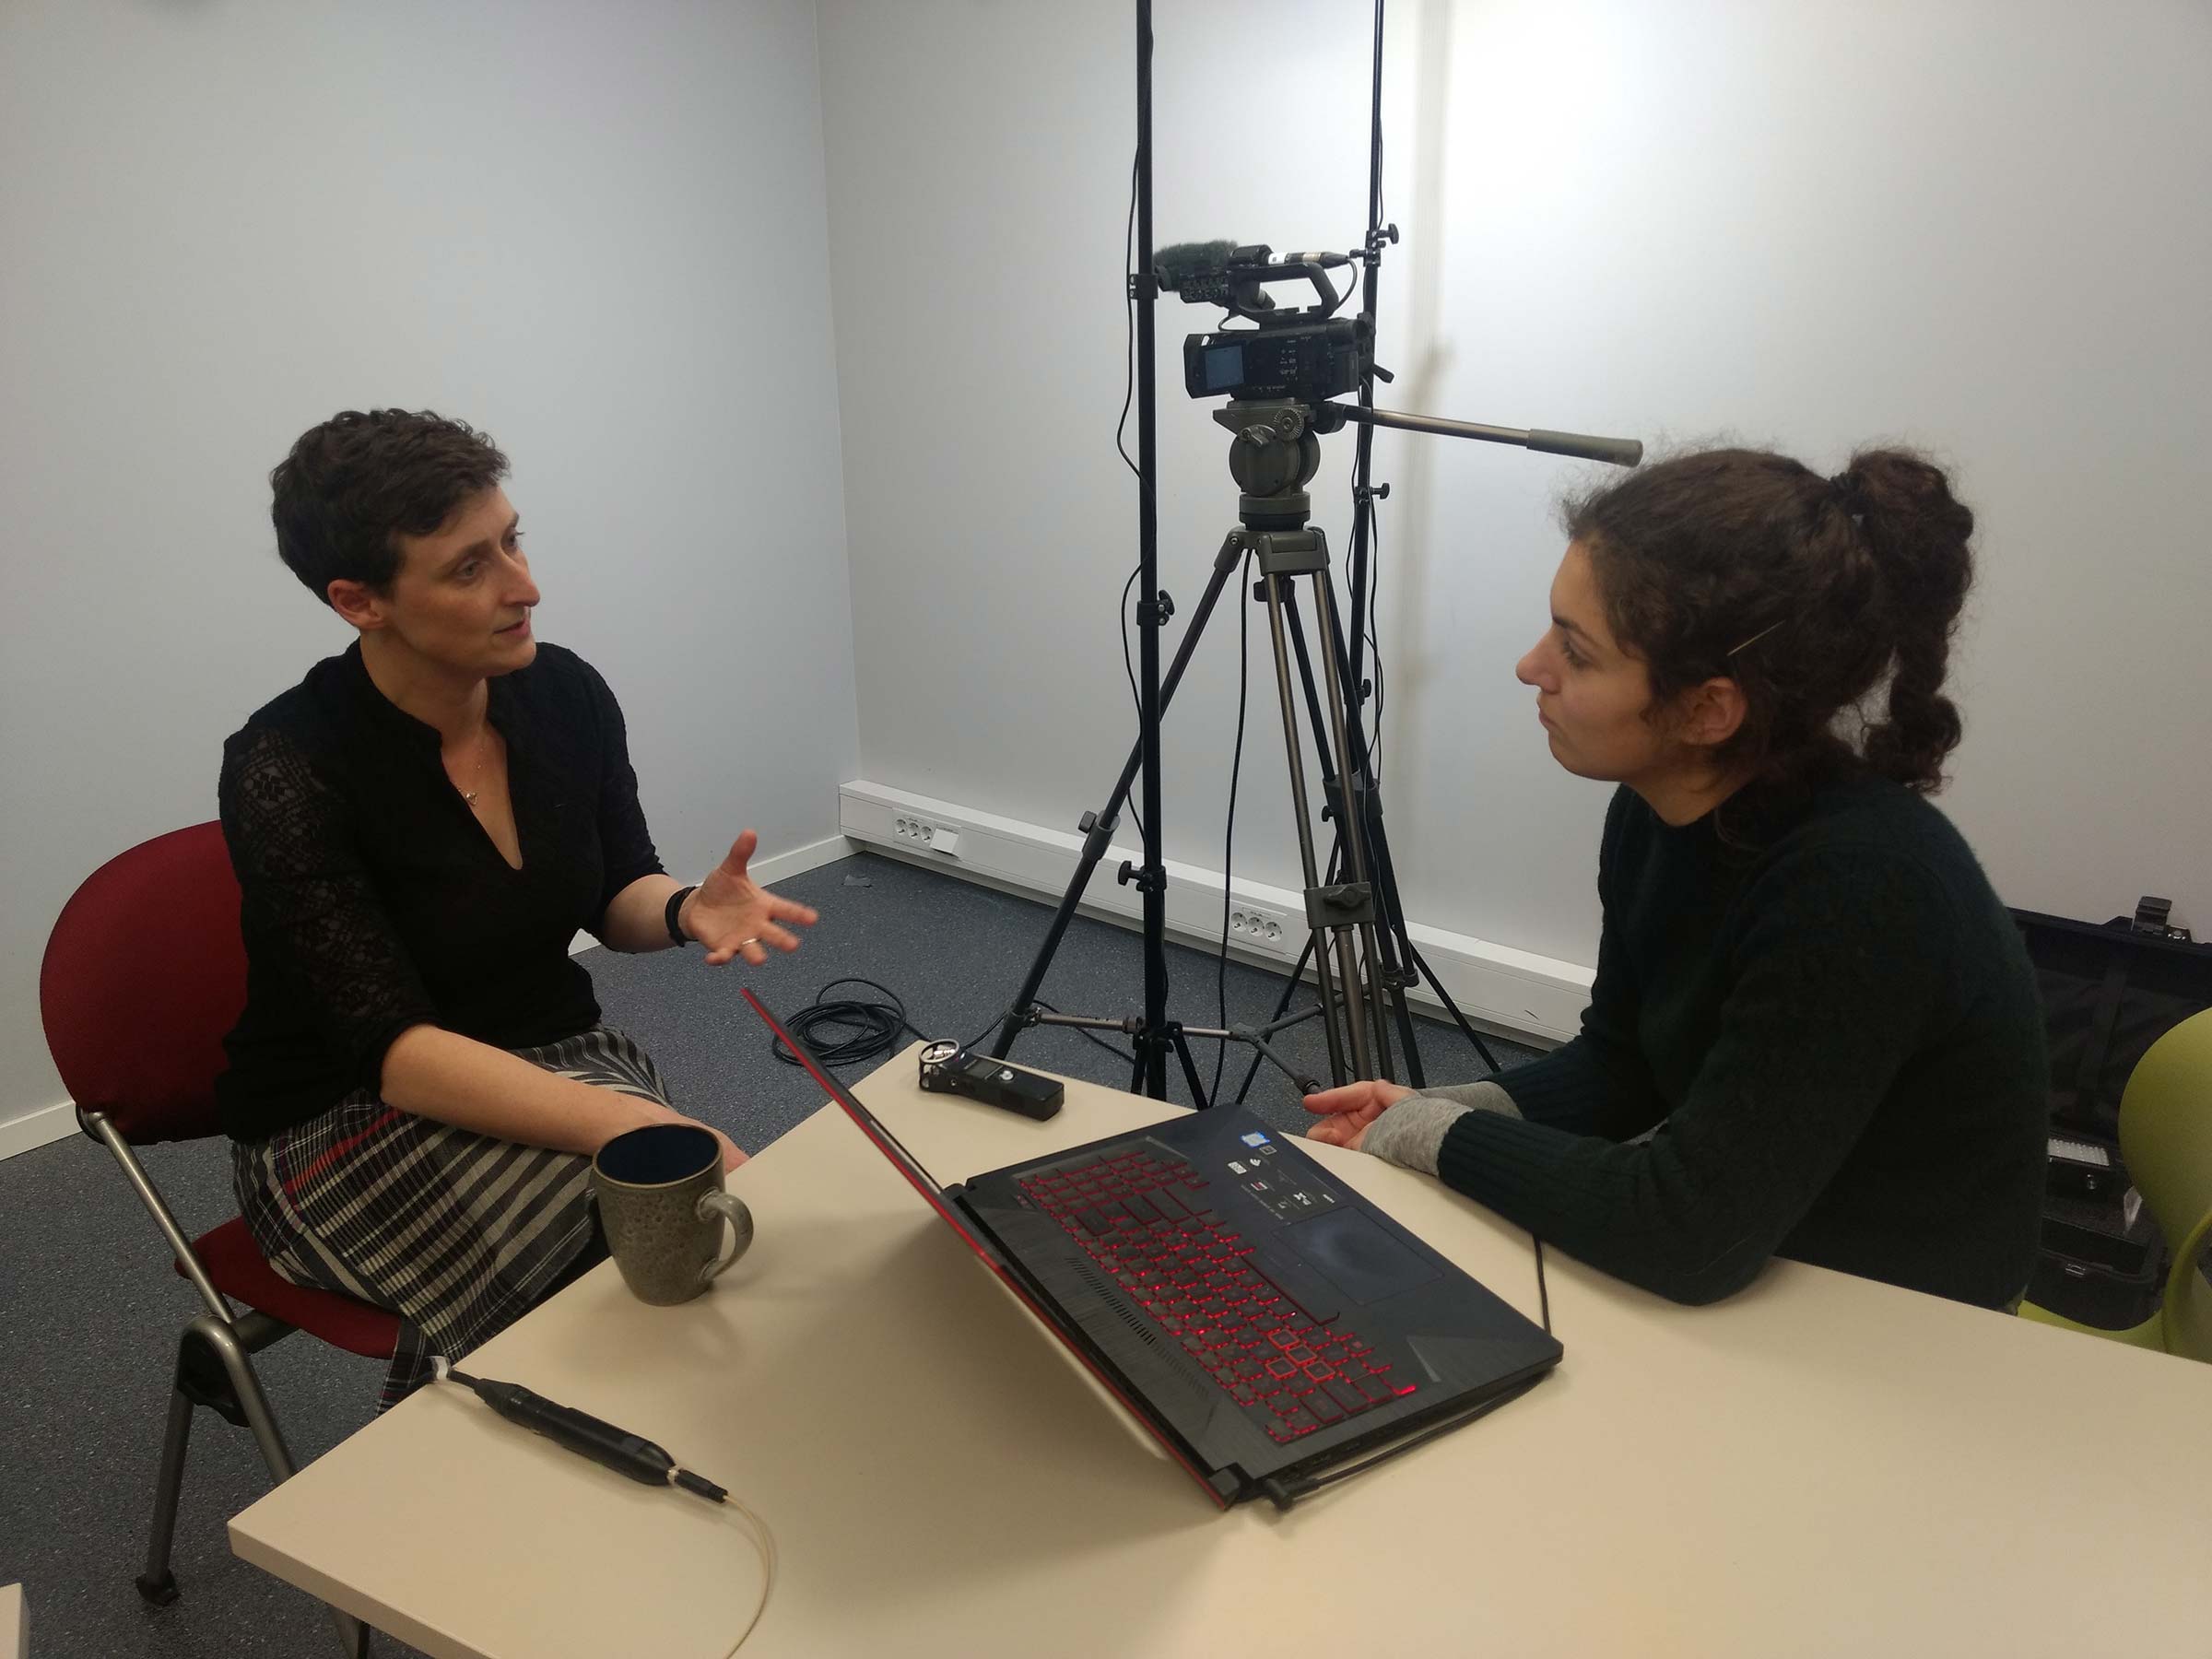 From left to right: Liz Dobson and Karolina Jawad during the interview. Photo by Anna Xambó.